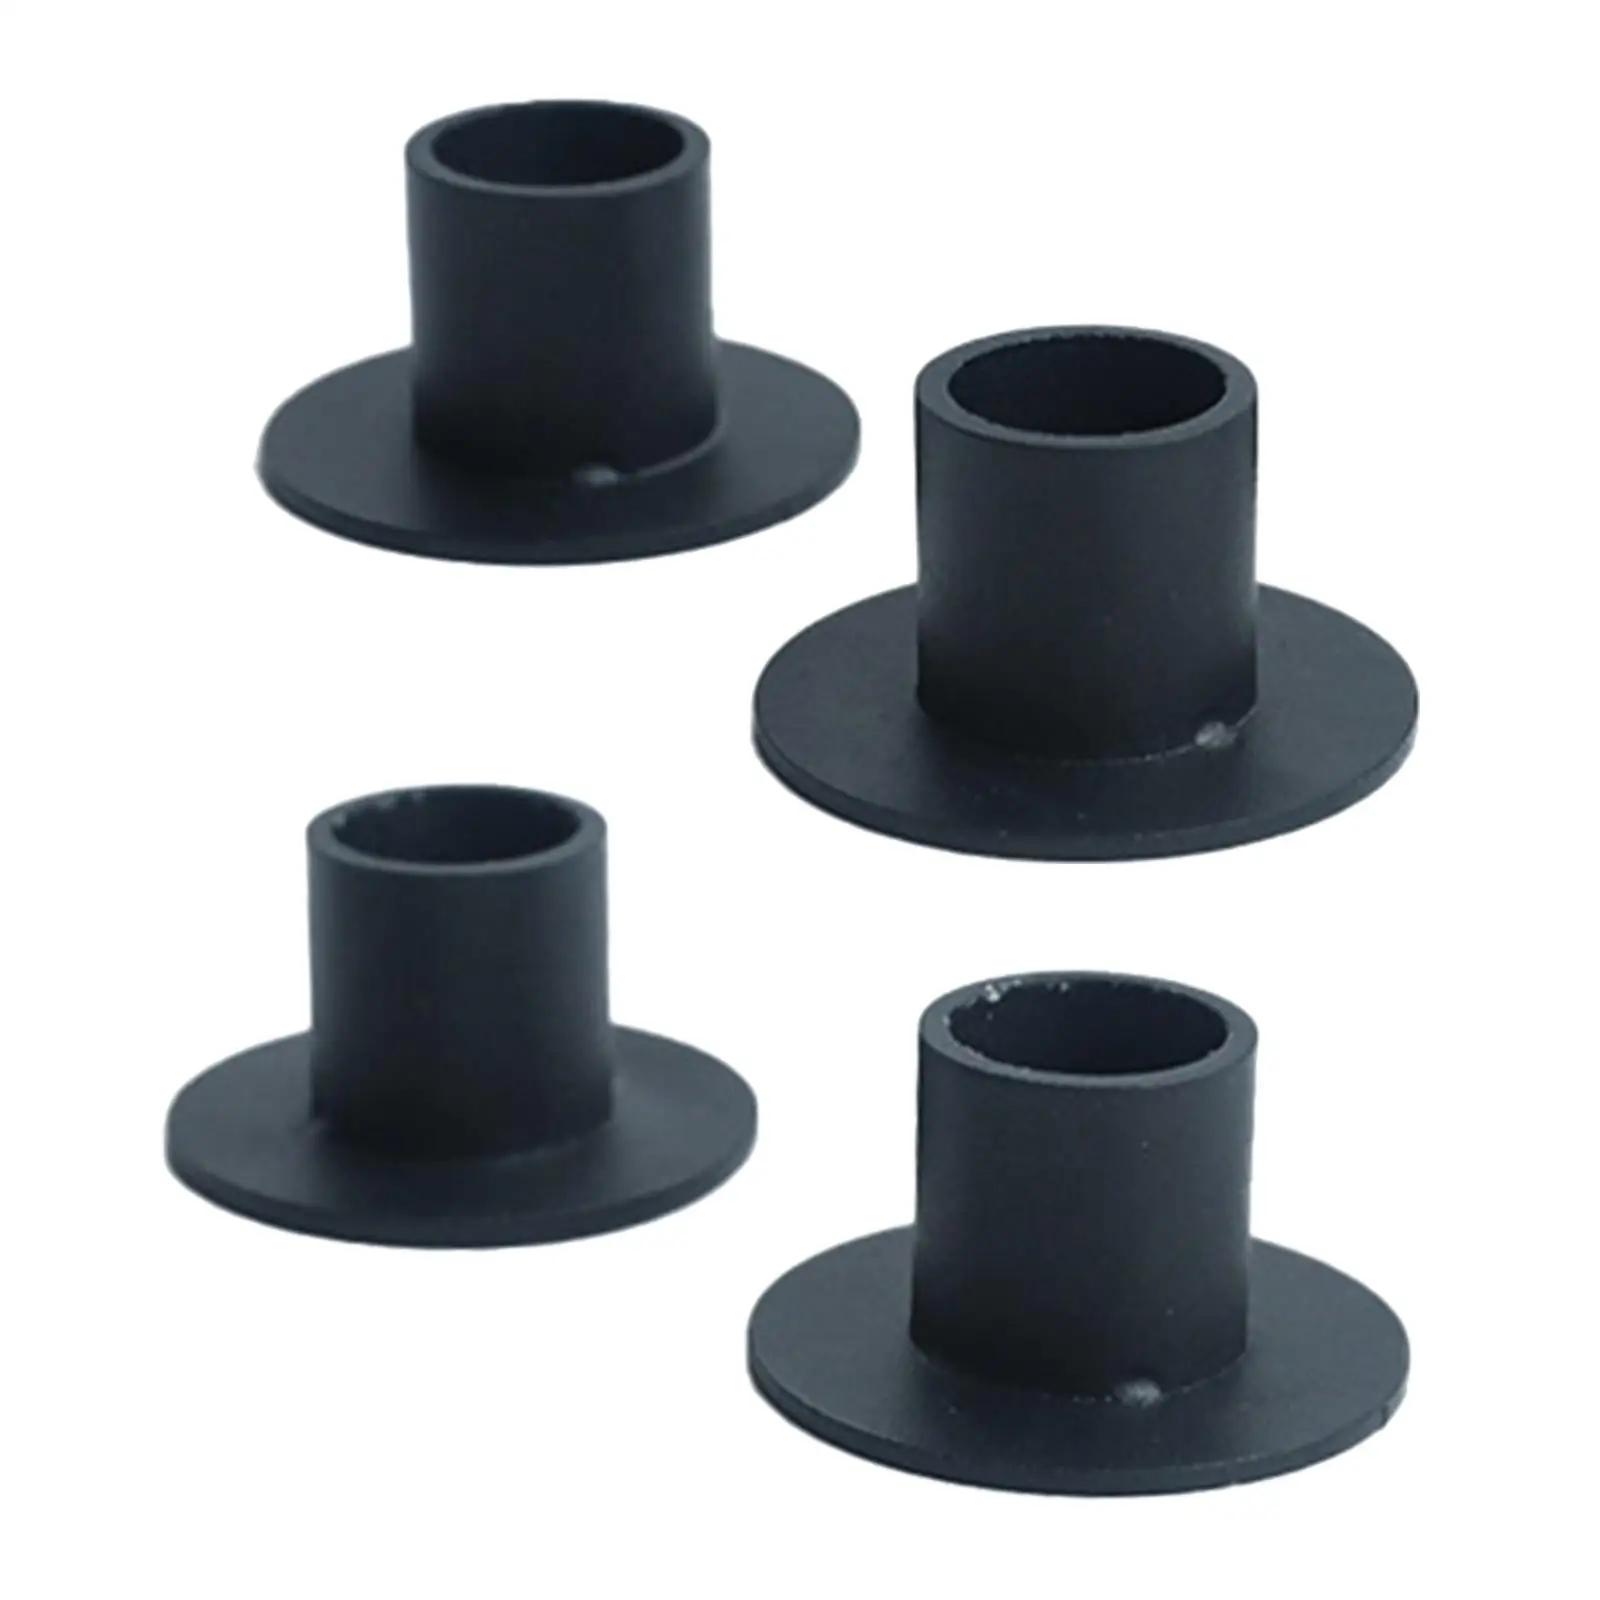 4Pcs Pillar Candle Holder Candlestick Holder Stand Candleholder for Party Events Farmhouse Holiday Bedroom Home Decorations